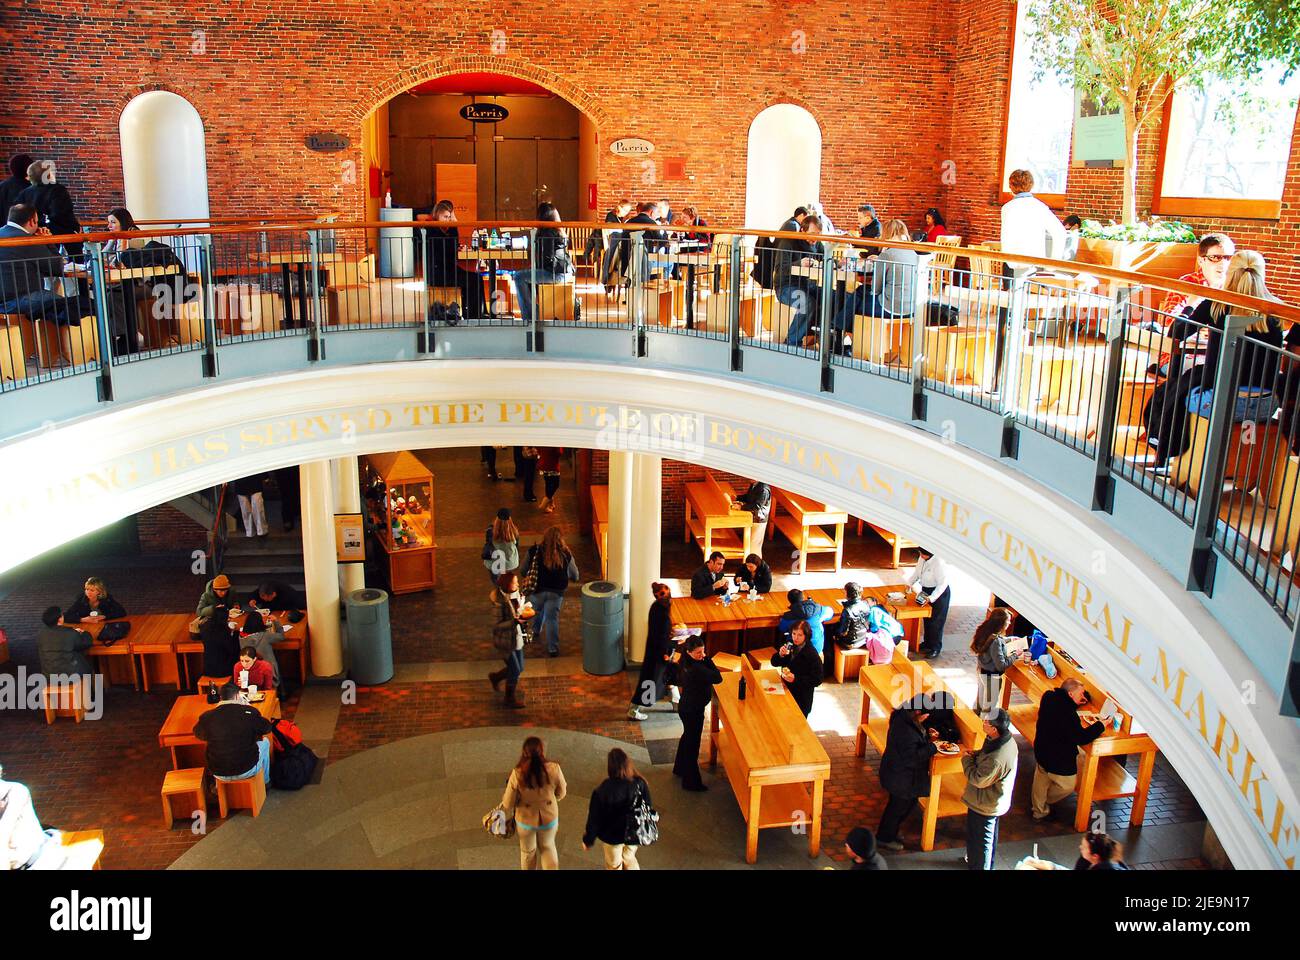 A lunchtime crowd of people gather at the tables of Boston’s Quincy Market Stock Photo